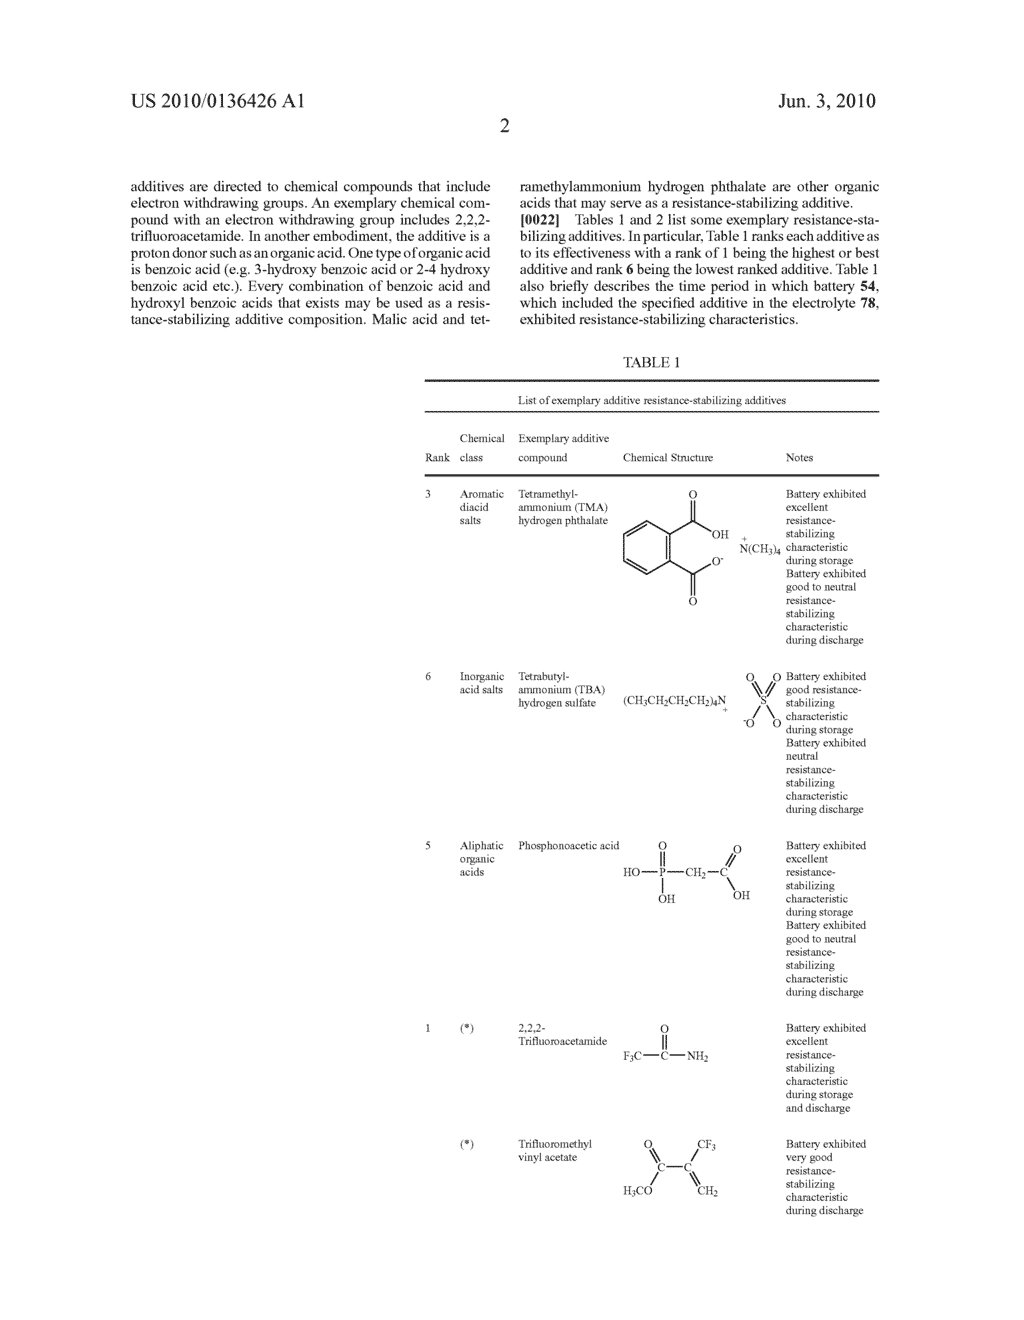 RESISTANCE-STABILIZING ADDITIVES FOR ELECTROLYTE - diagram, schematic, and image 10